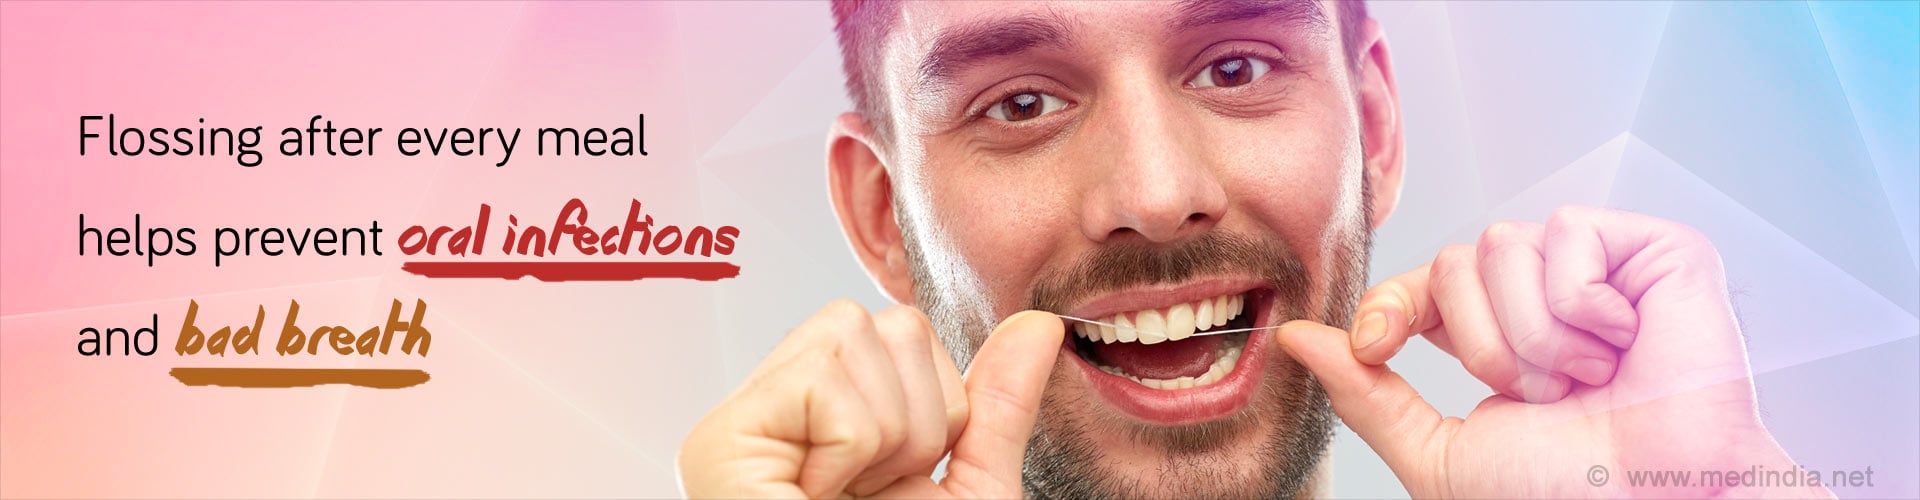 Flossing after every meal helps prevent oral infections and bad breath